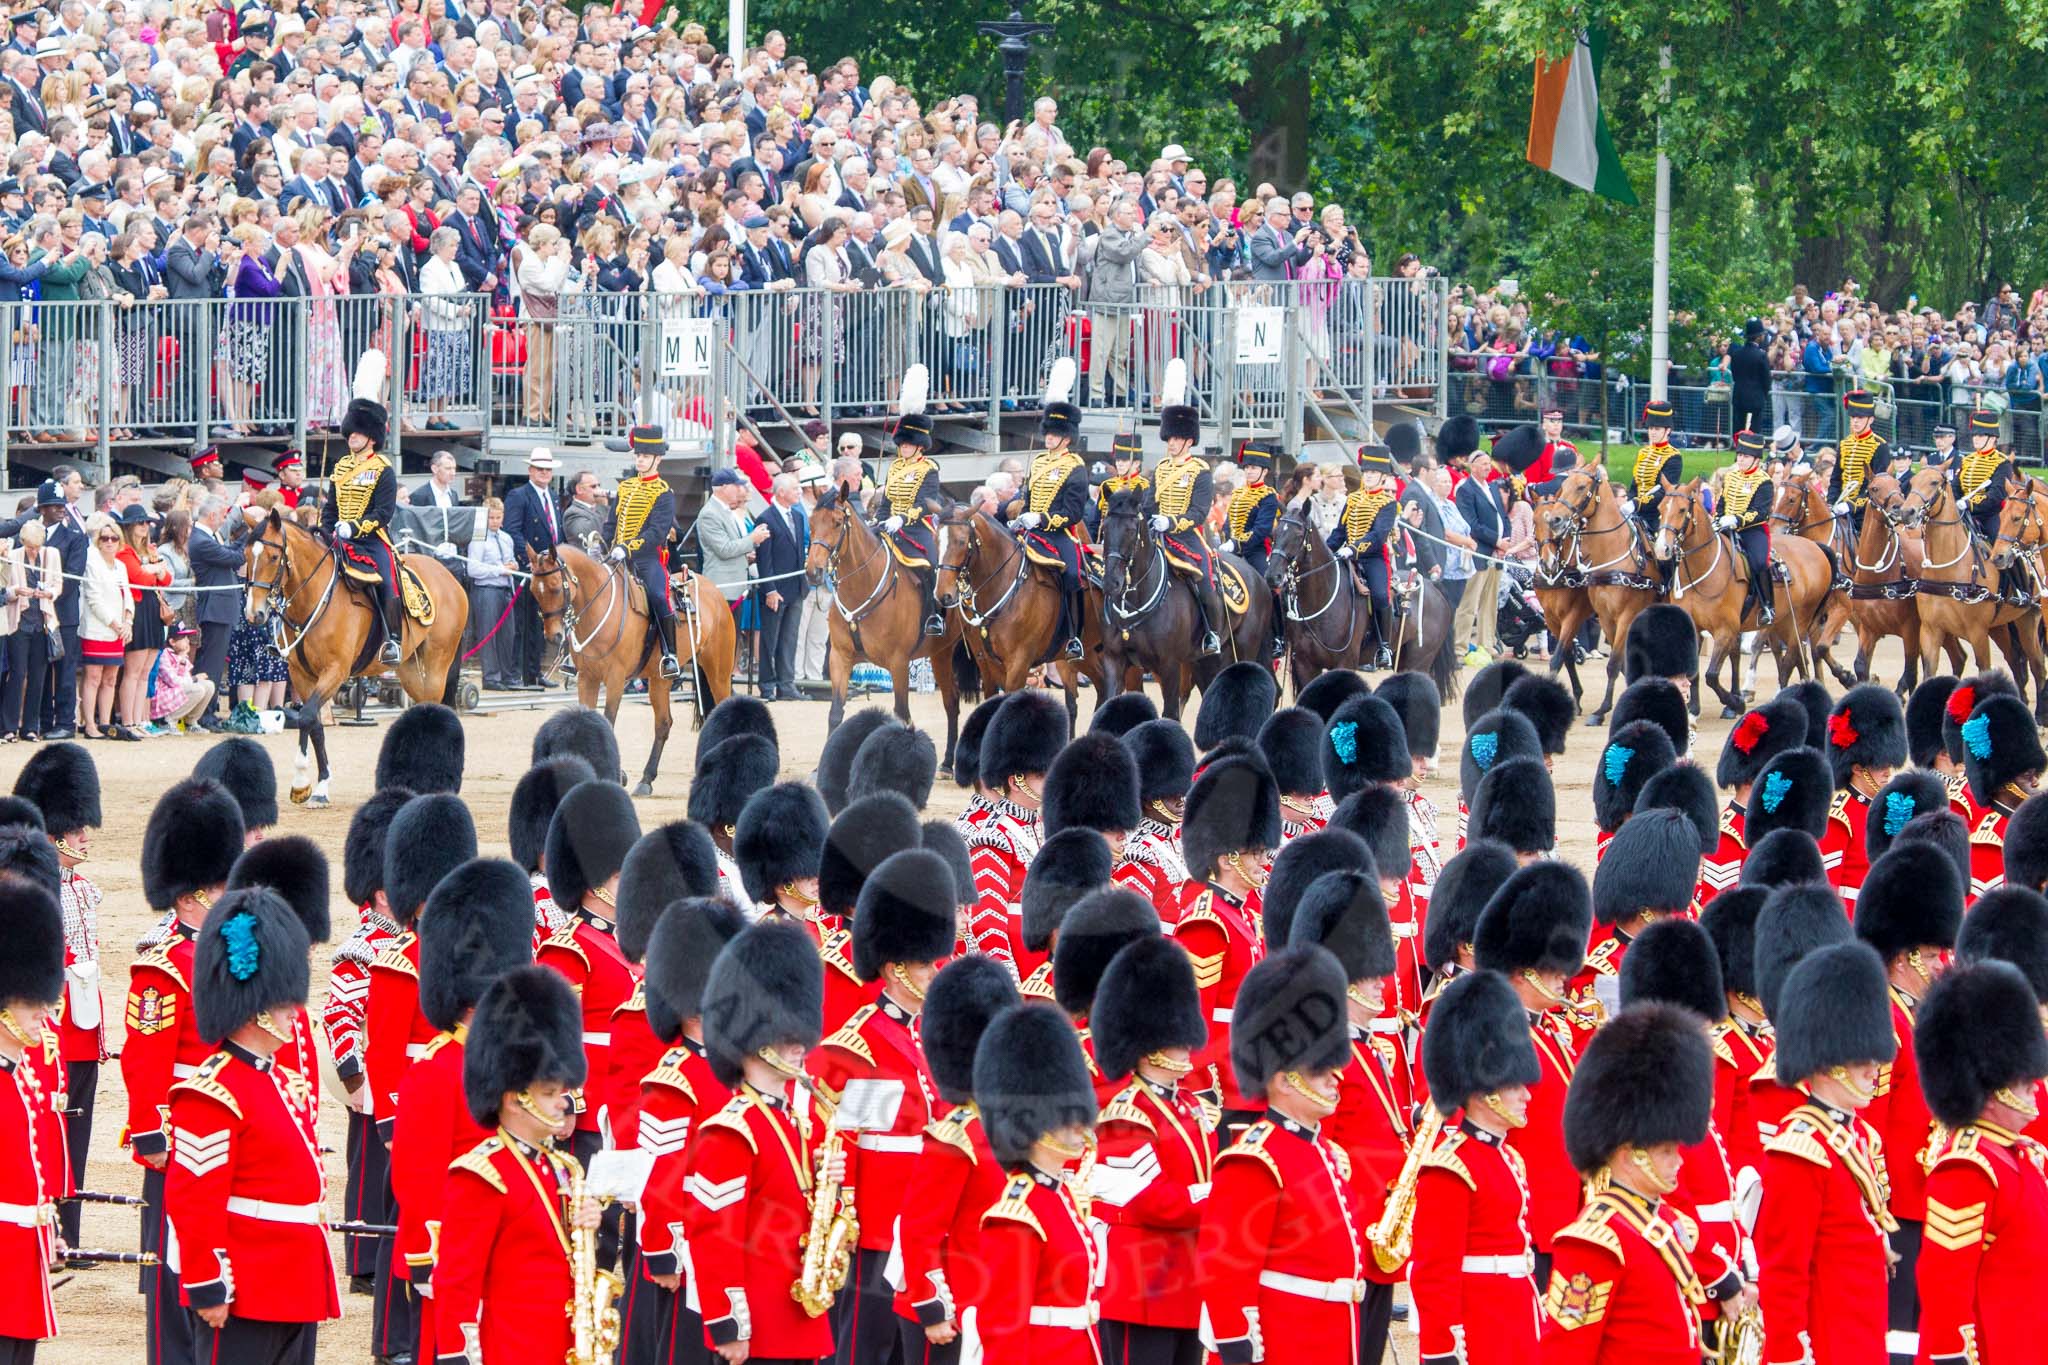 Trooping the Colour 2014.
Horse Guards Parade, Westminster,
London SW1A,

United Kingdom,
on 14 June 2014 at 11:54, image #731